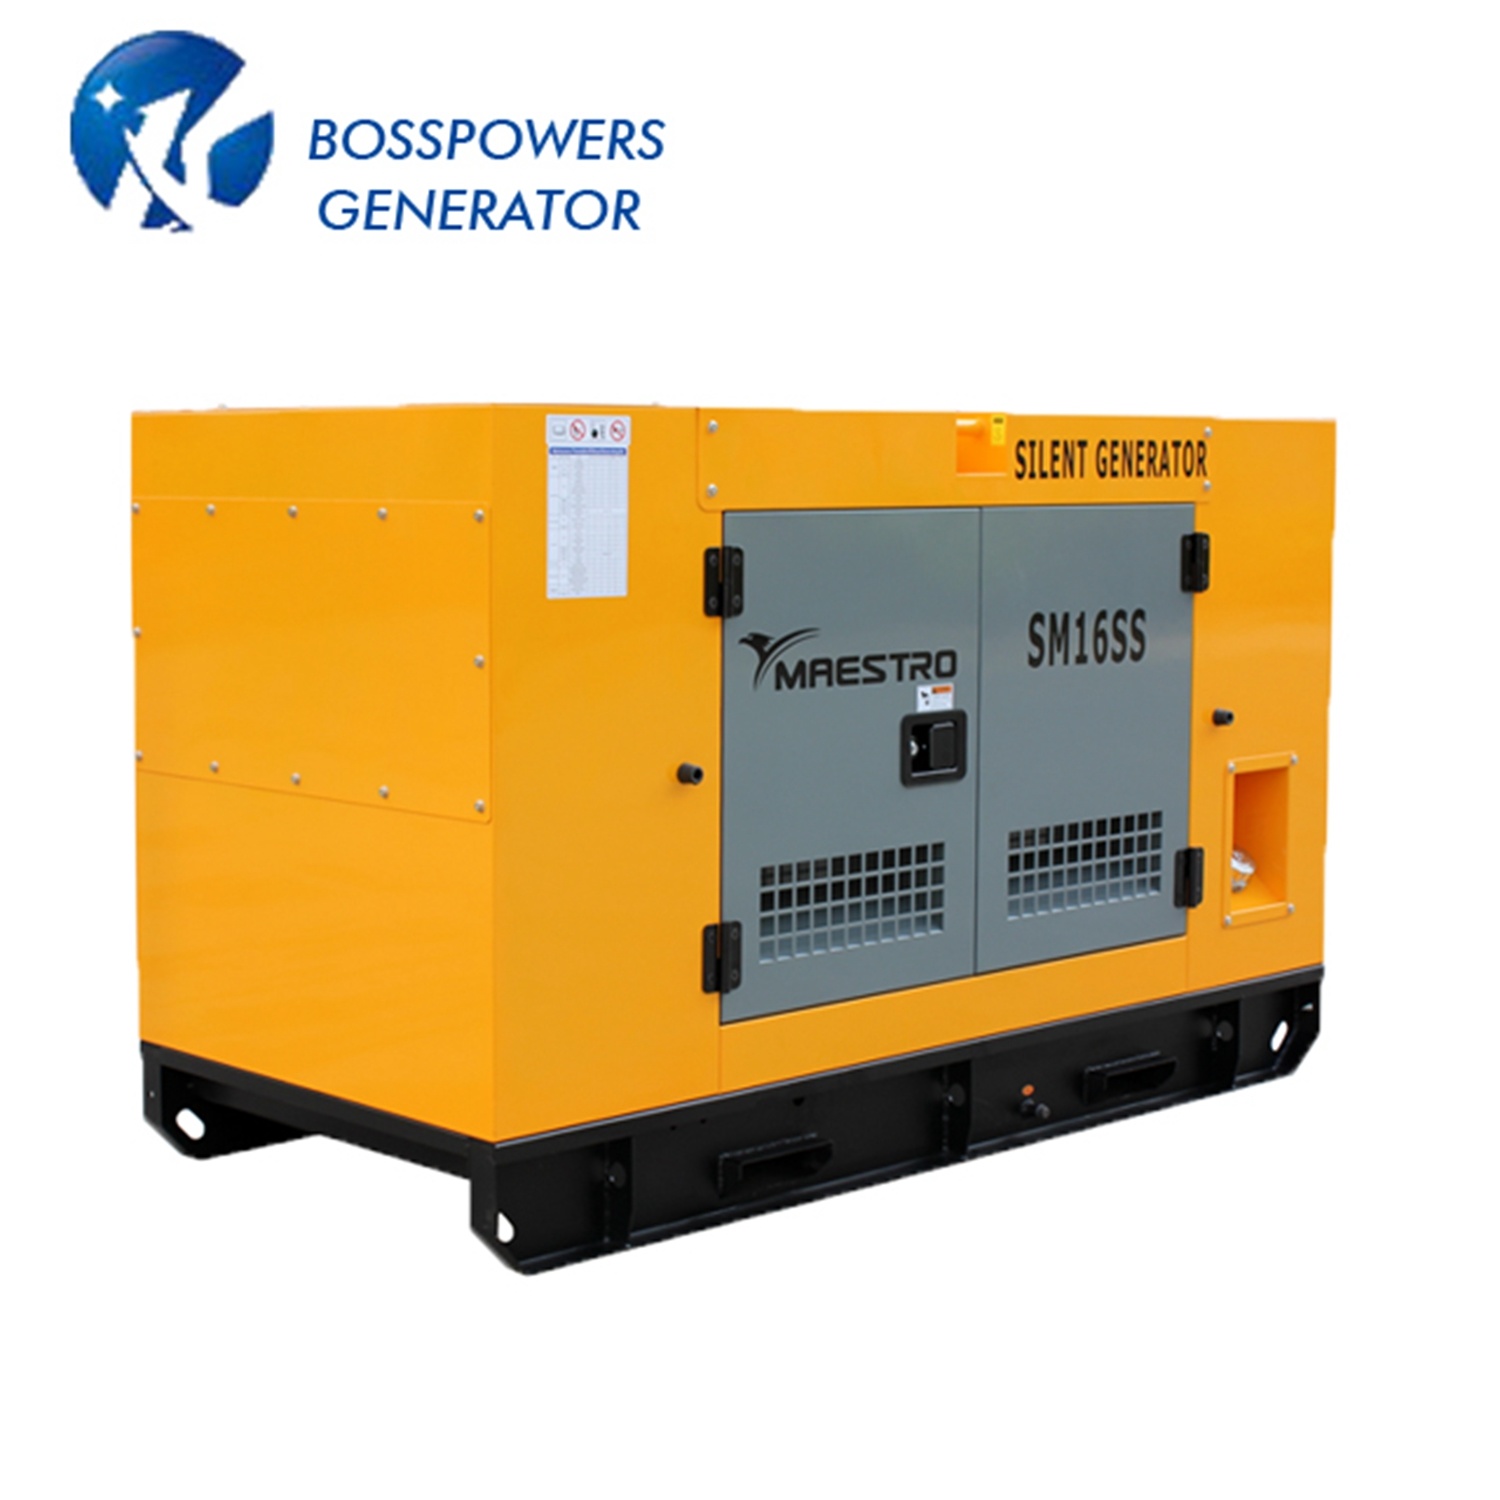 200kVA Power Automatic Start Diesel Generator Powered by 1106A-70tag3